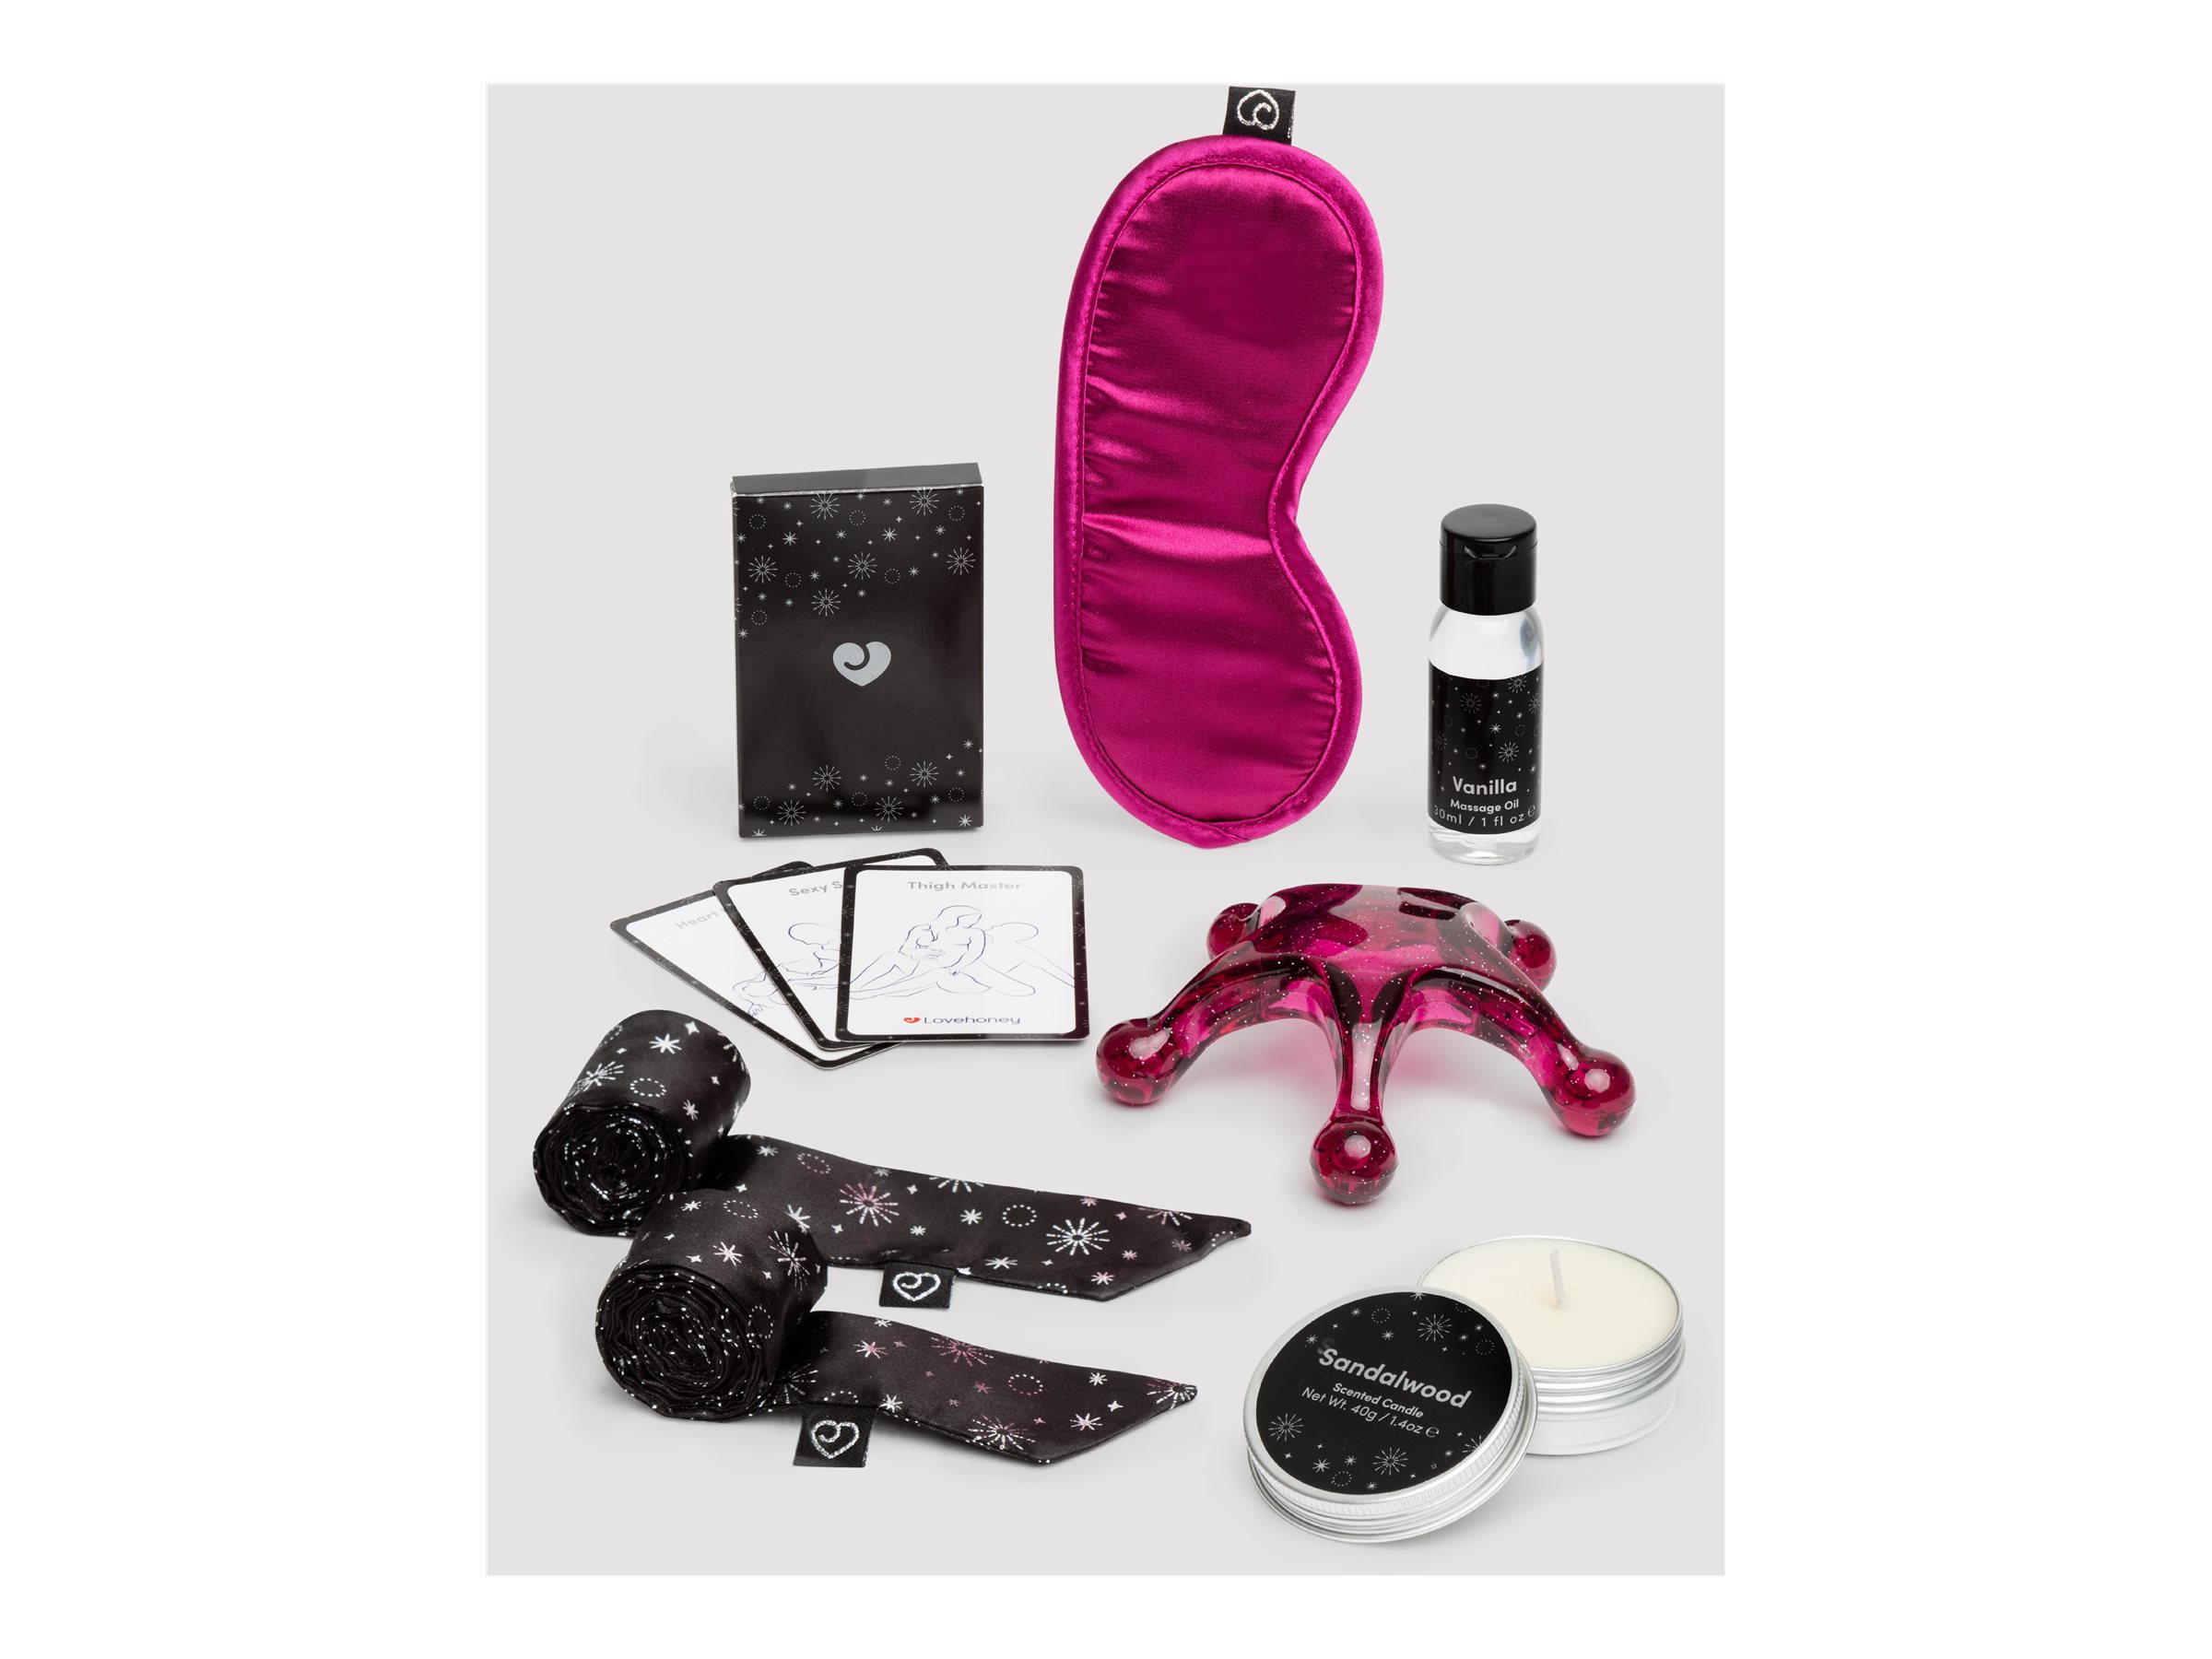 Lovehoney Dream Wand Sex Toy Gift Box - 12 pieces